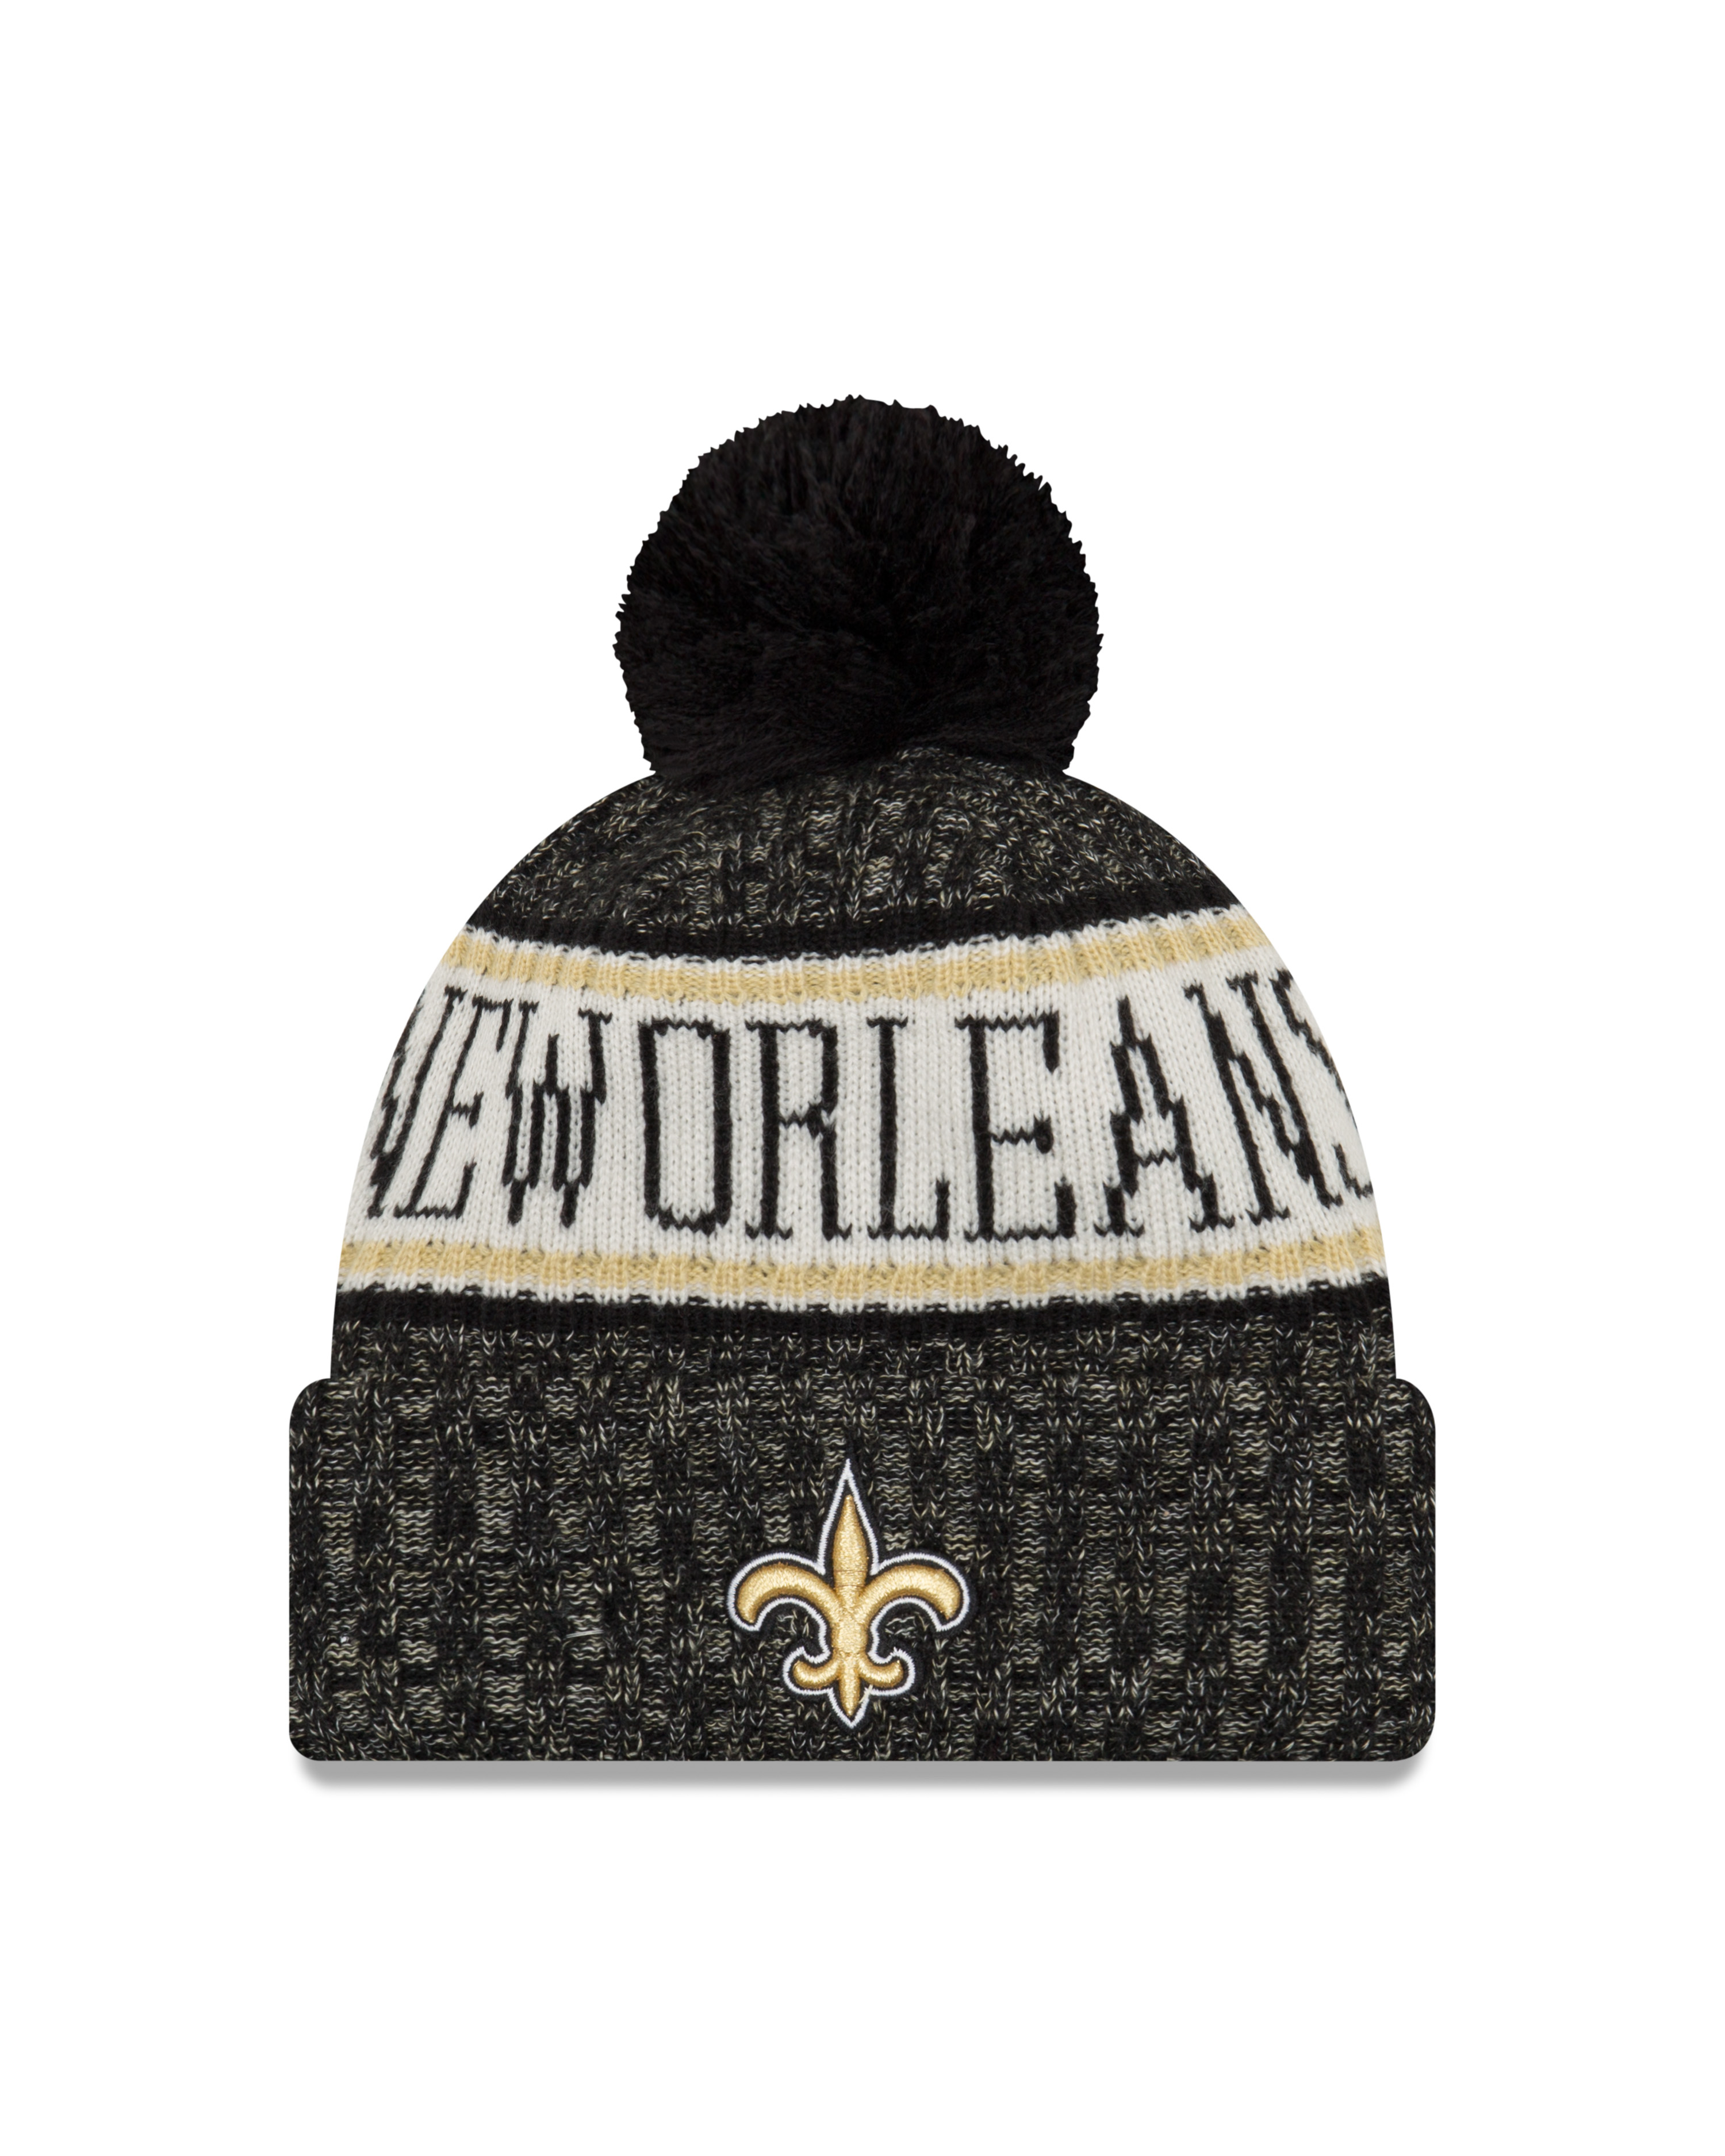 New Era Official NFL Cold Weather Collection #42